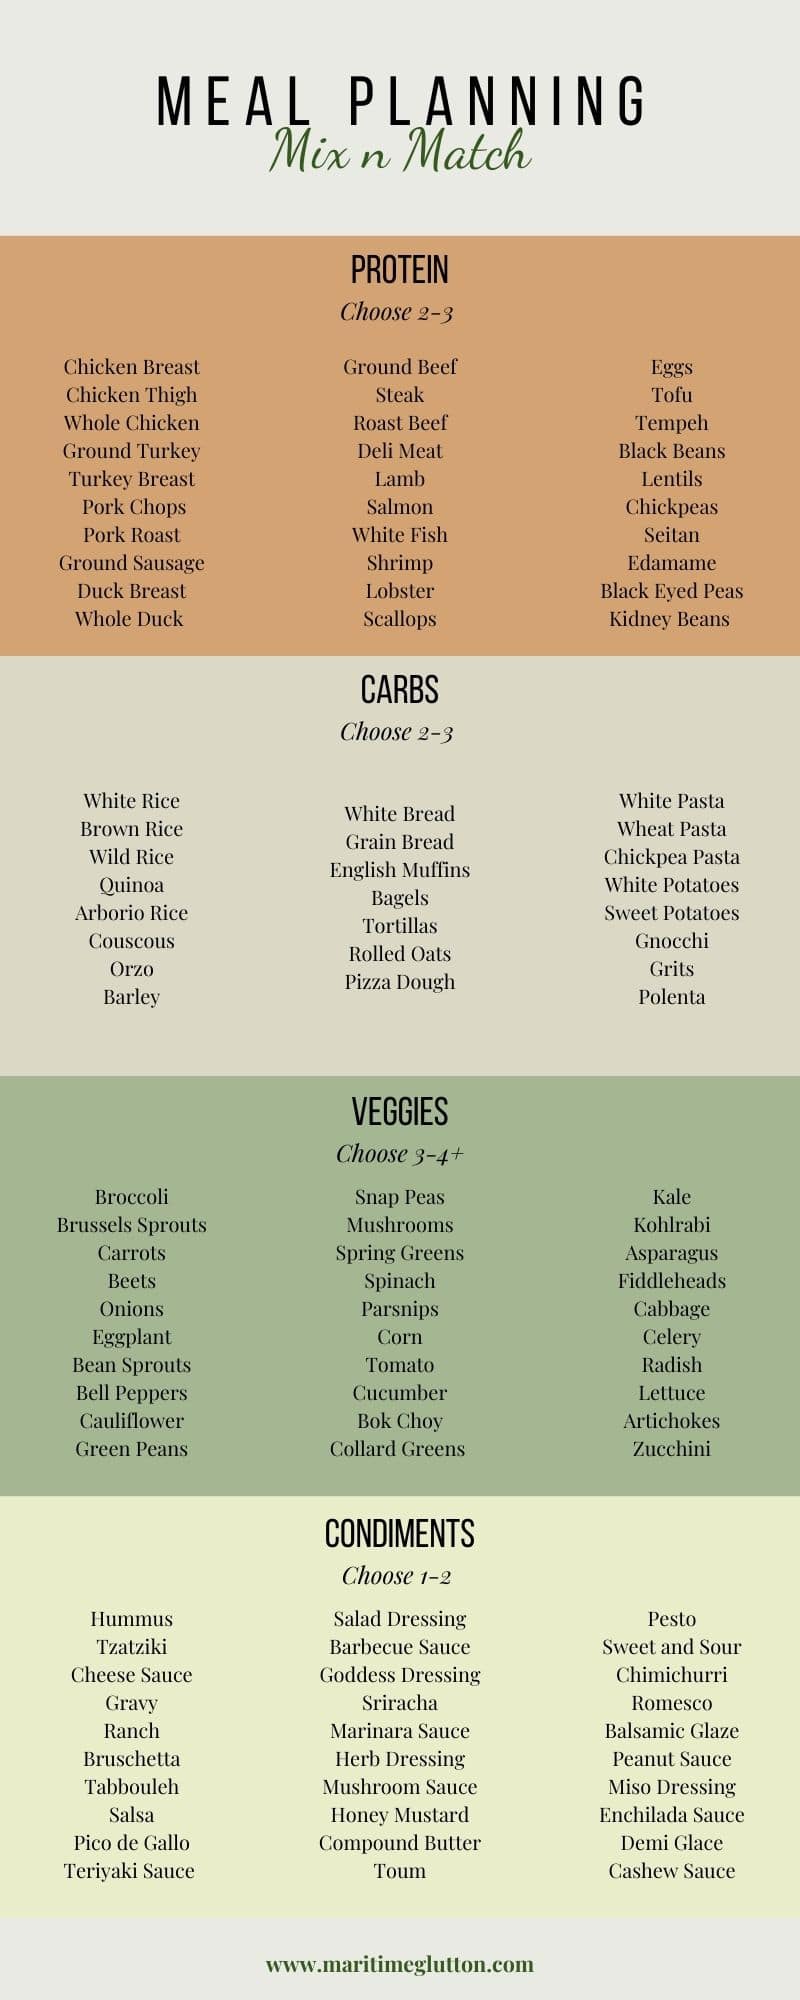 A helpful infographic showing how to take a carb, protein, veggie and sauce to mix and match your way to an easy meal plan.